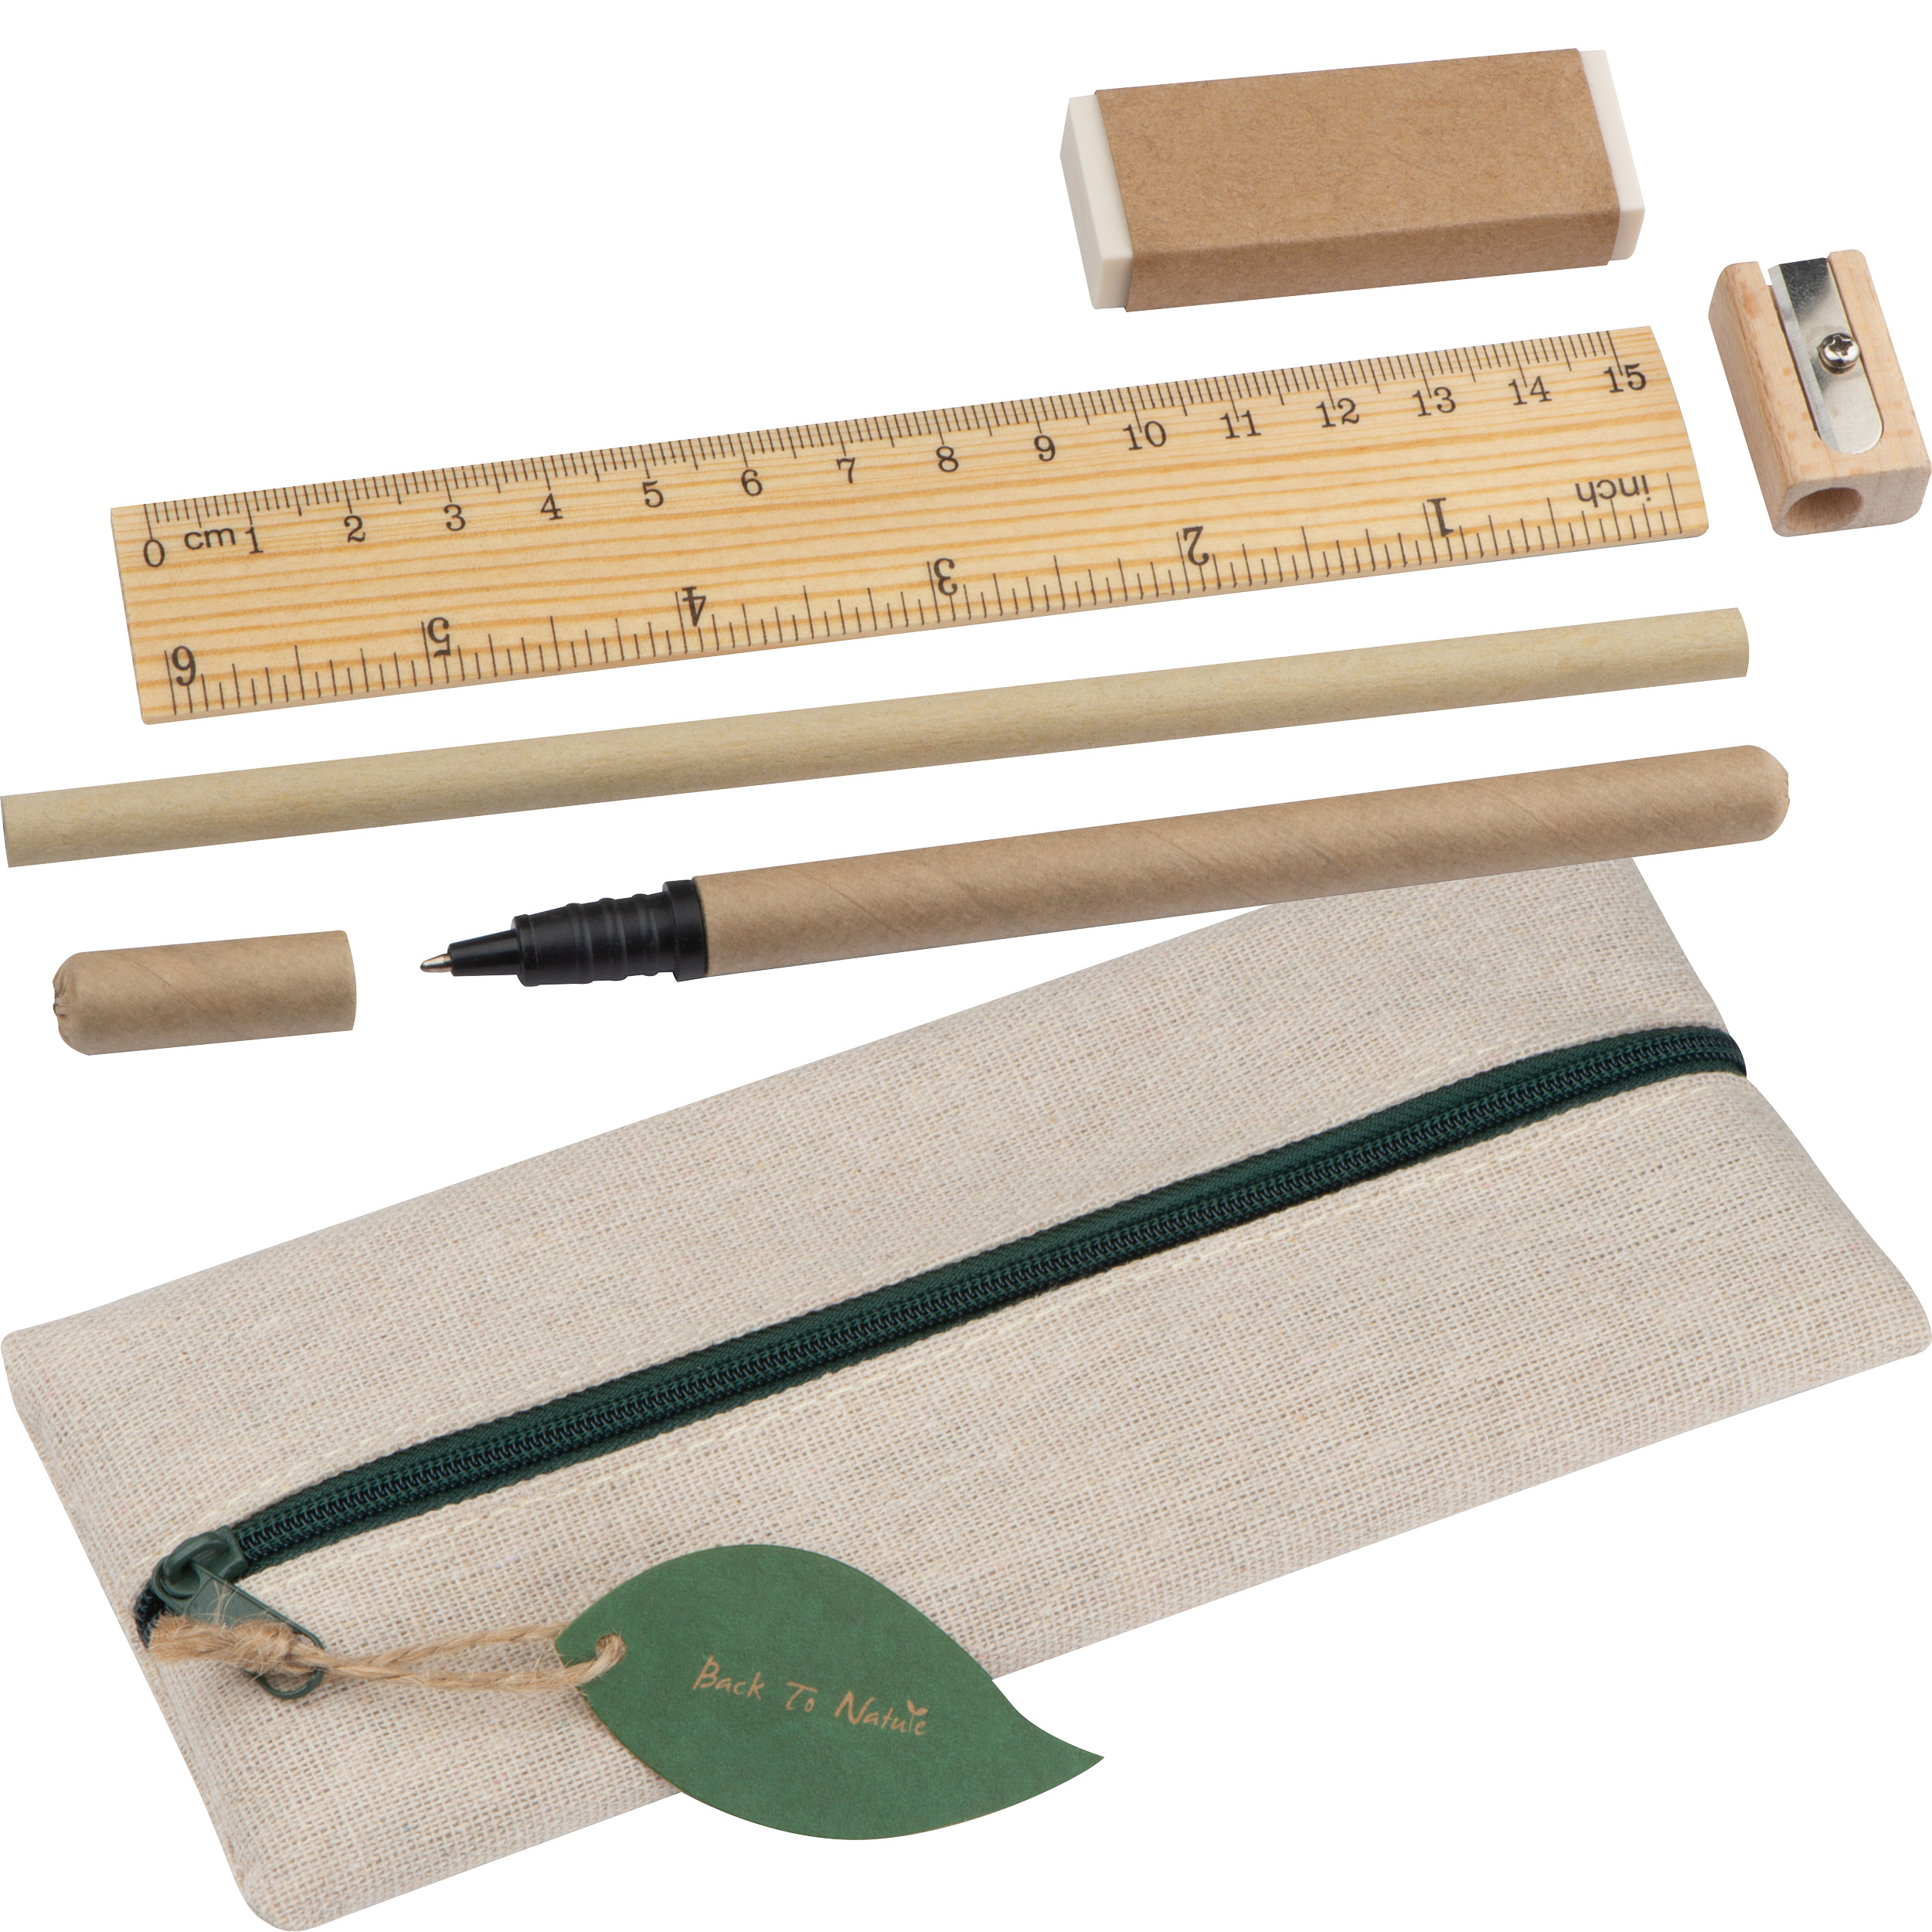 Writing set with ruler, eraser, sharpener, pencil and rollerball